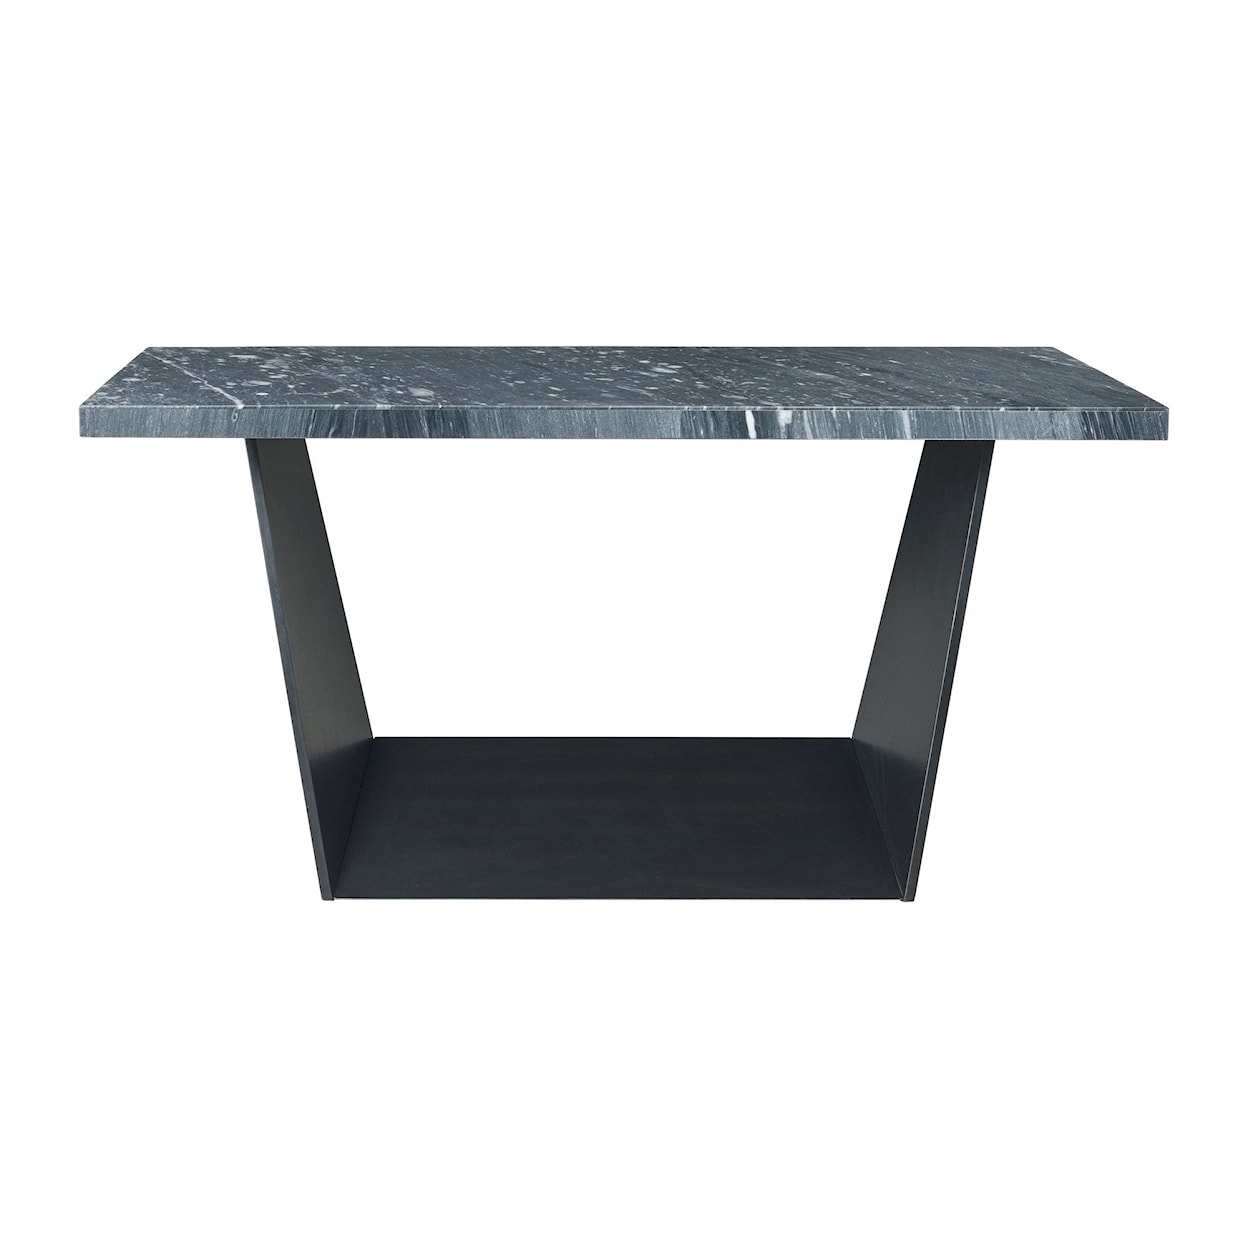 Elements International Beckley Counter Table